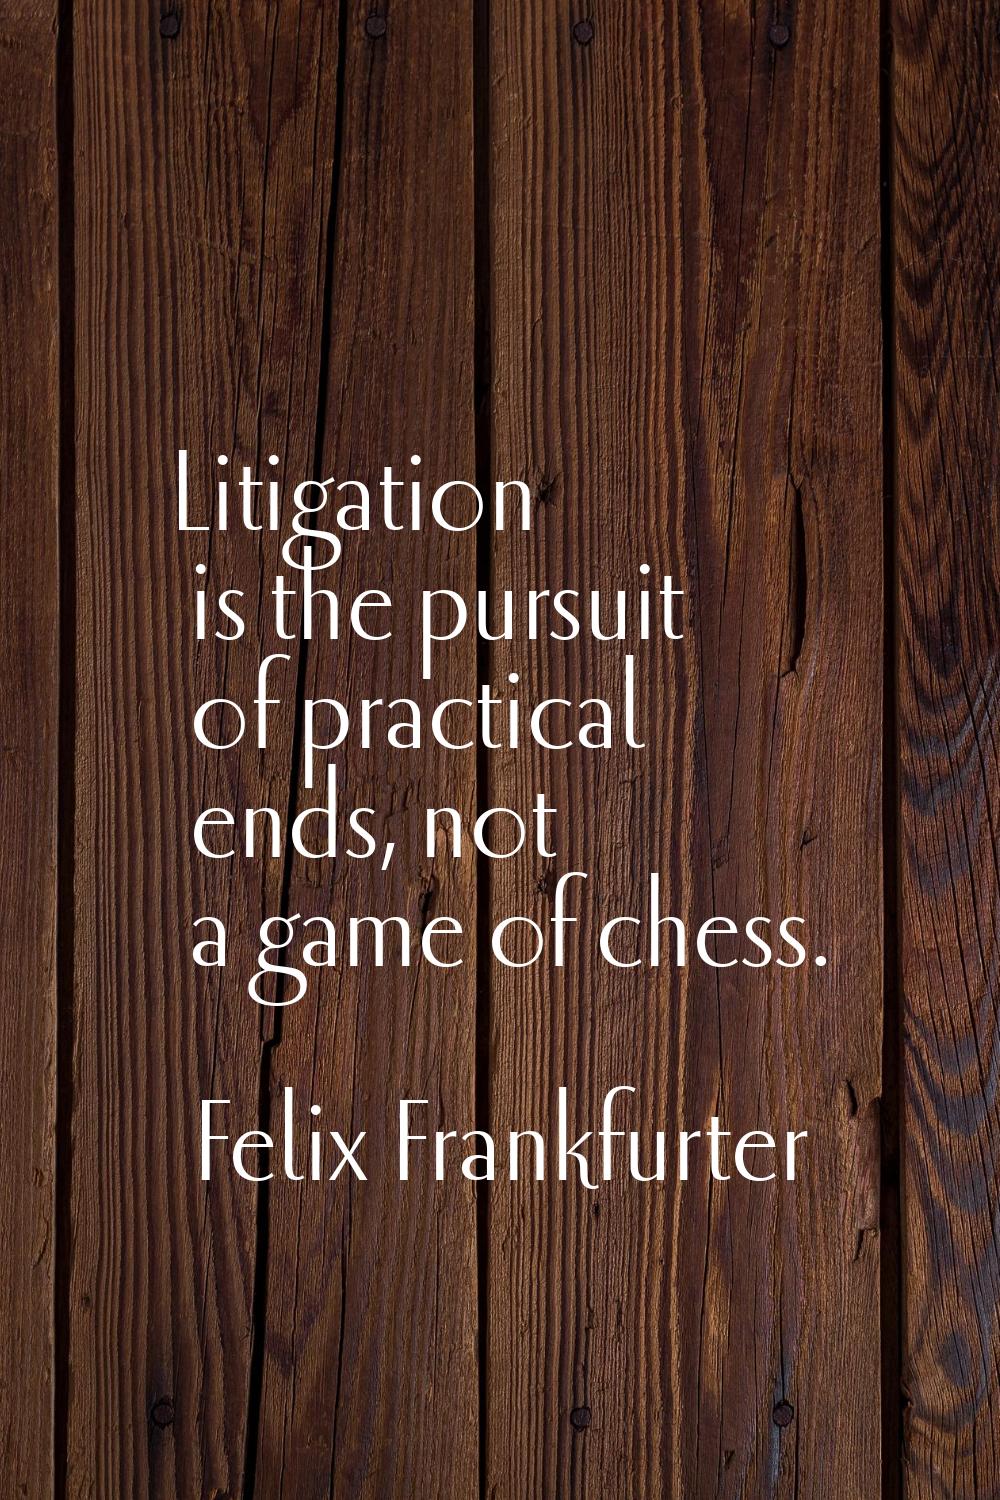 Litigation is the pursuit of practical ends, not a game of chess.